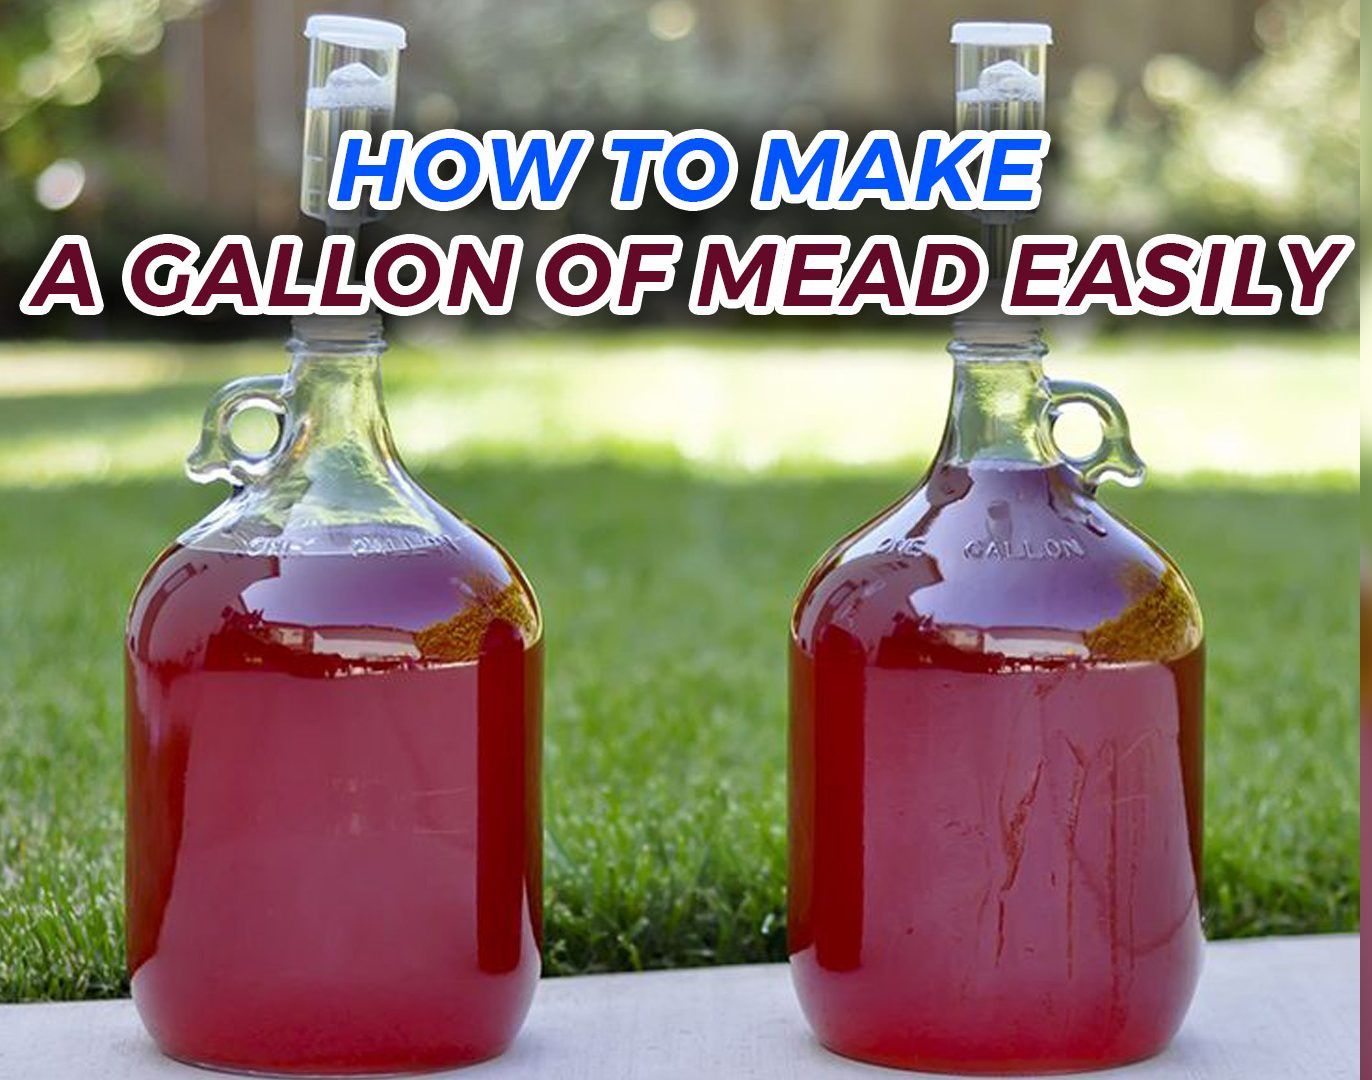 How to Make a Gallon of Mead Easily